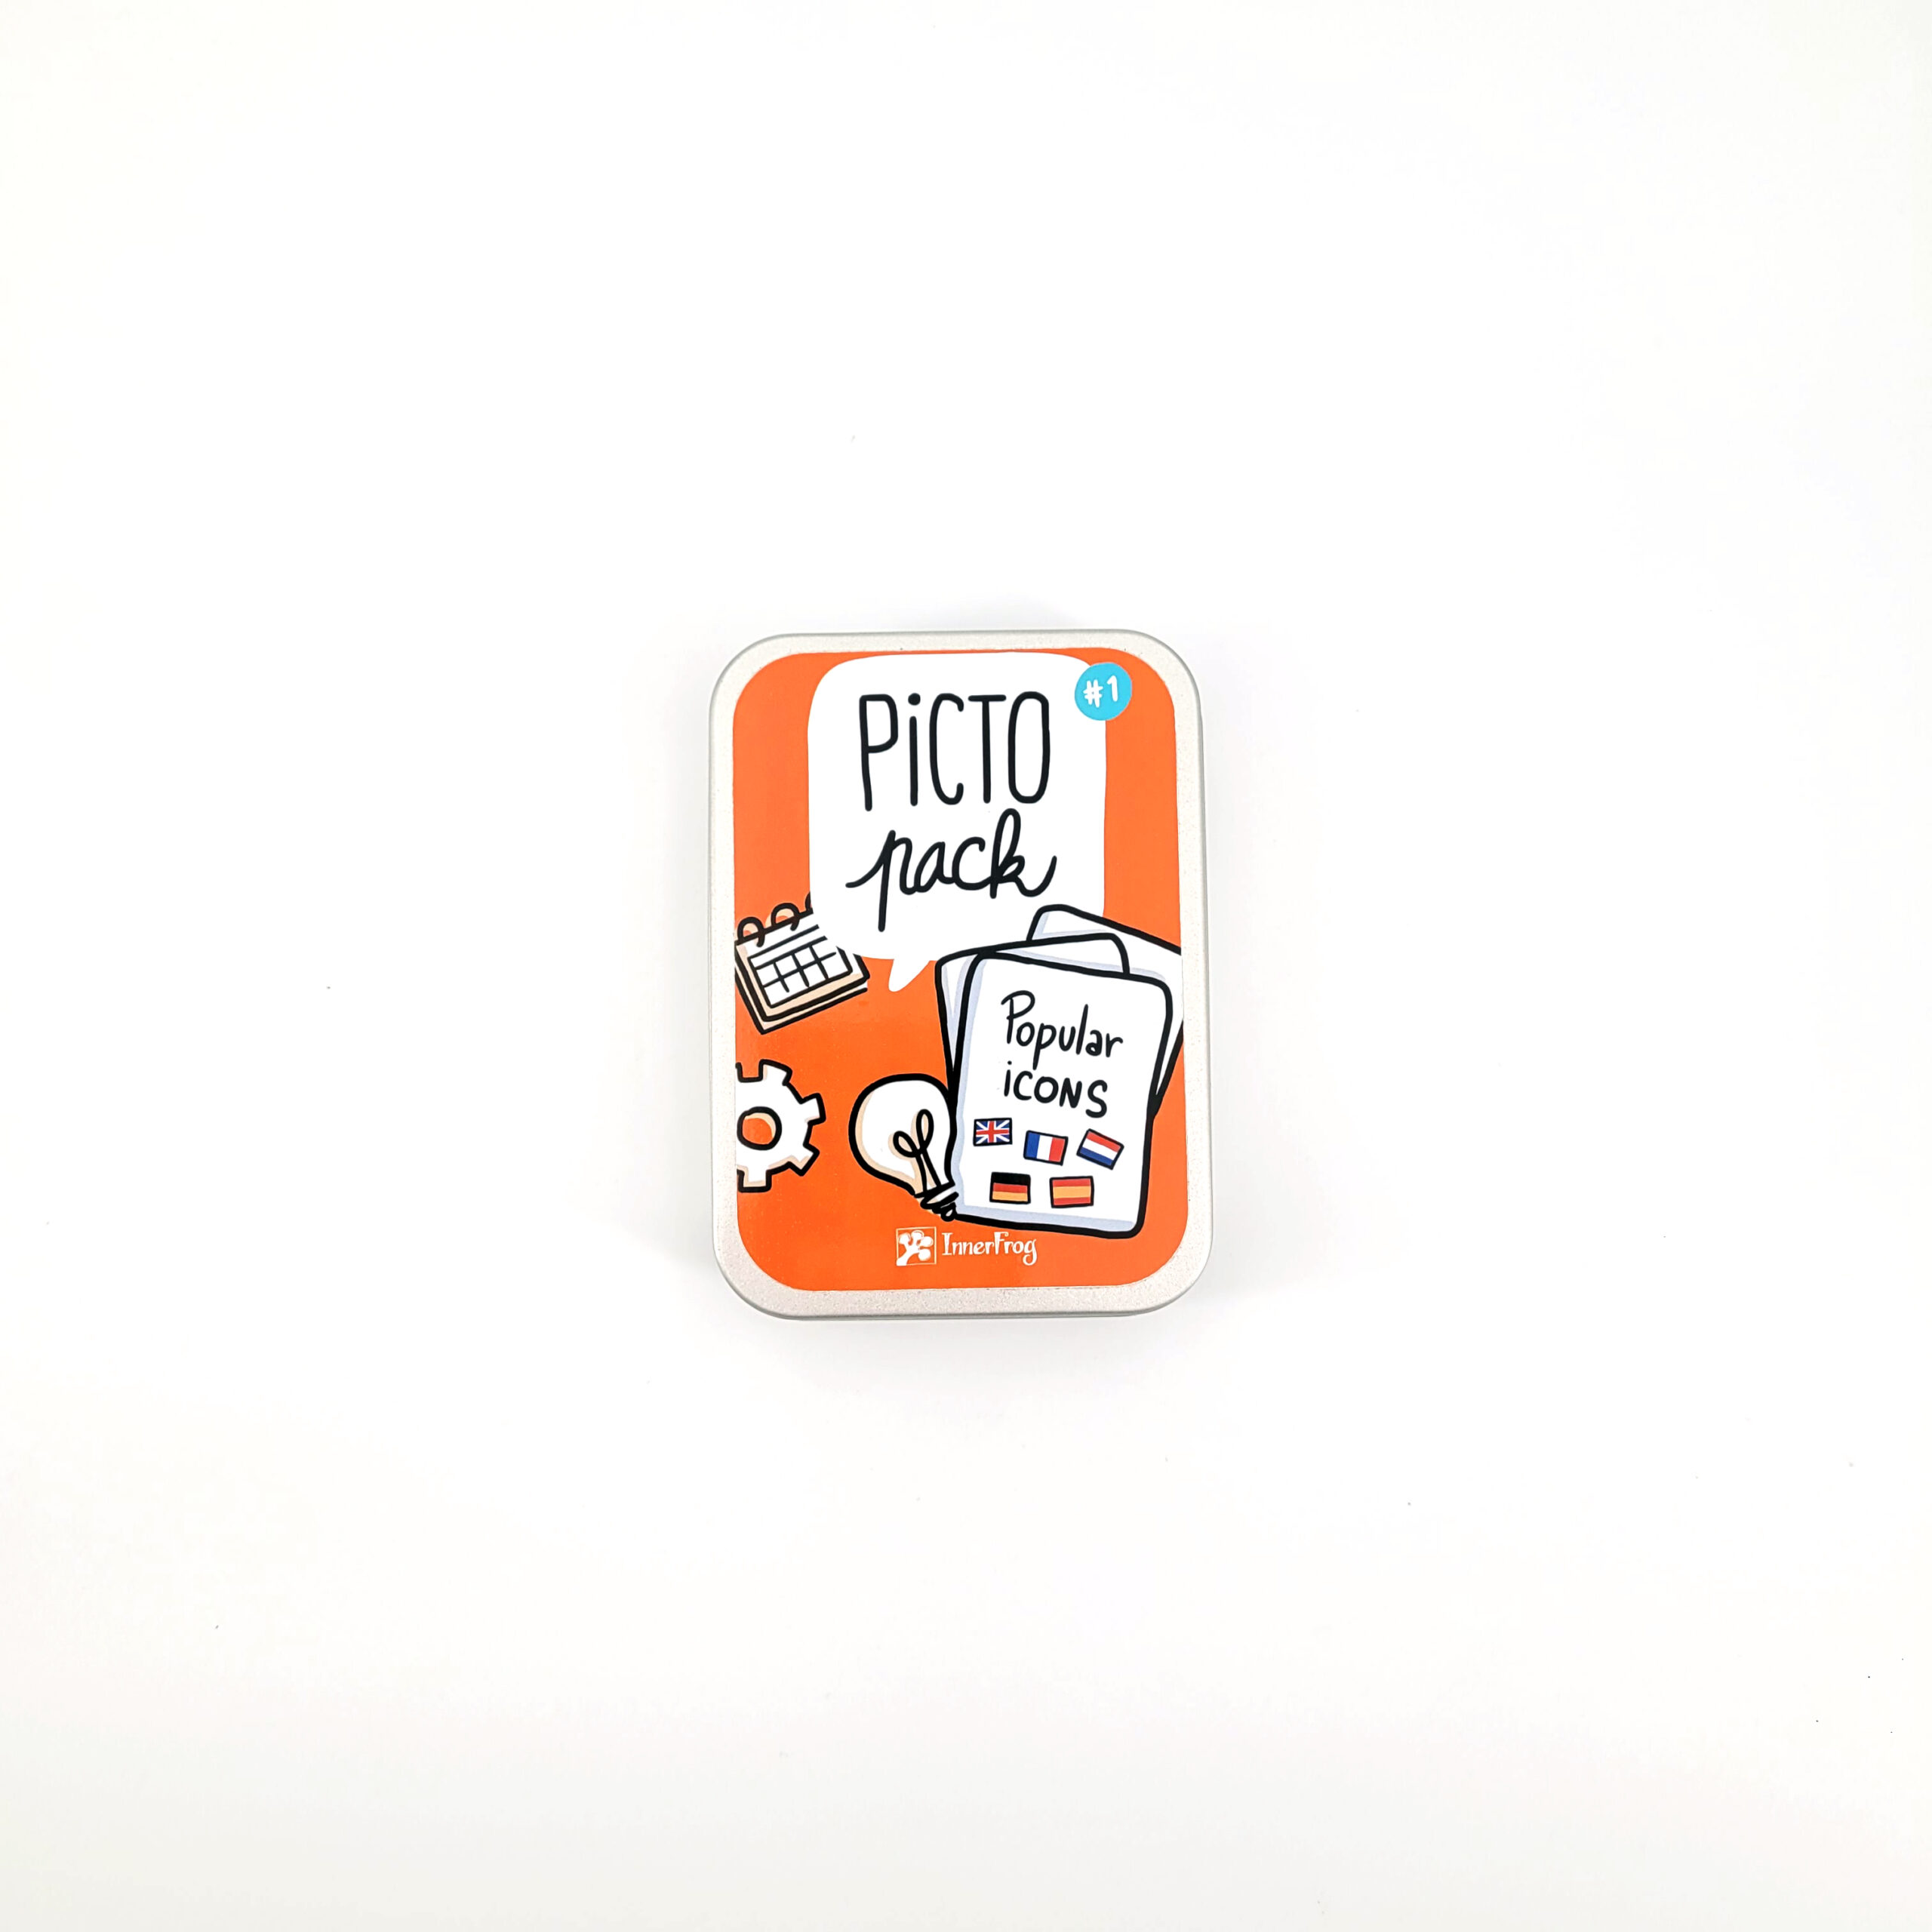 Picto Pack 1 - Popular Icons 5